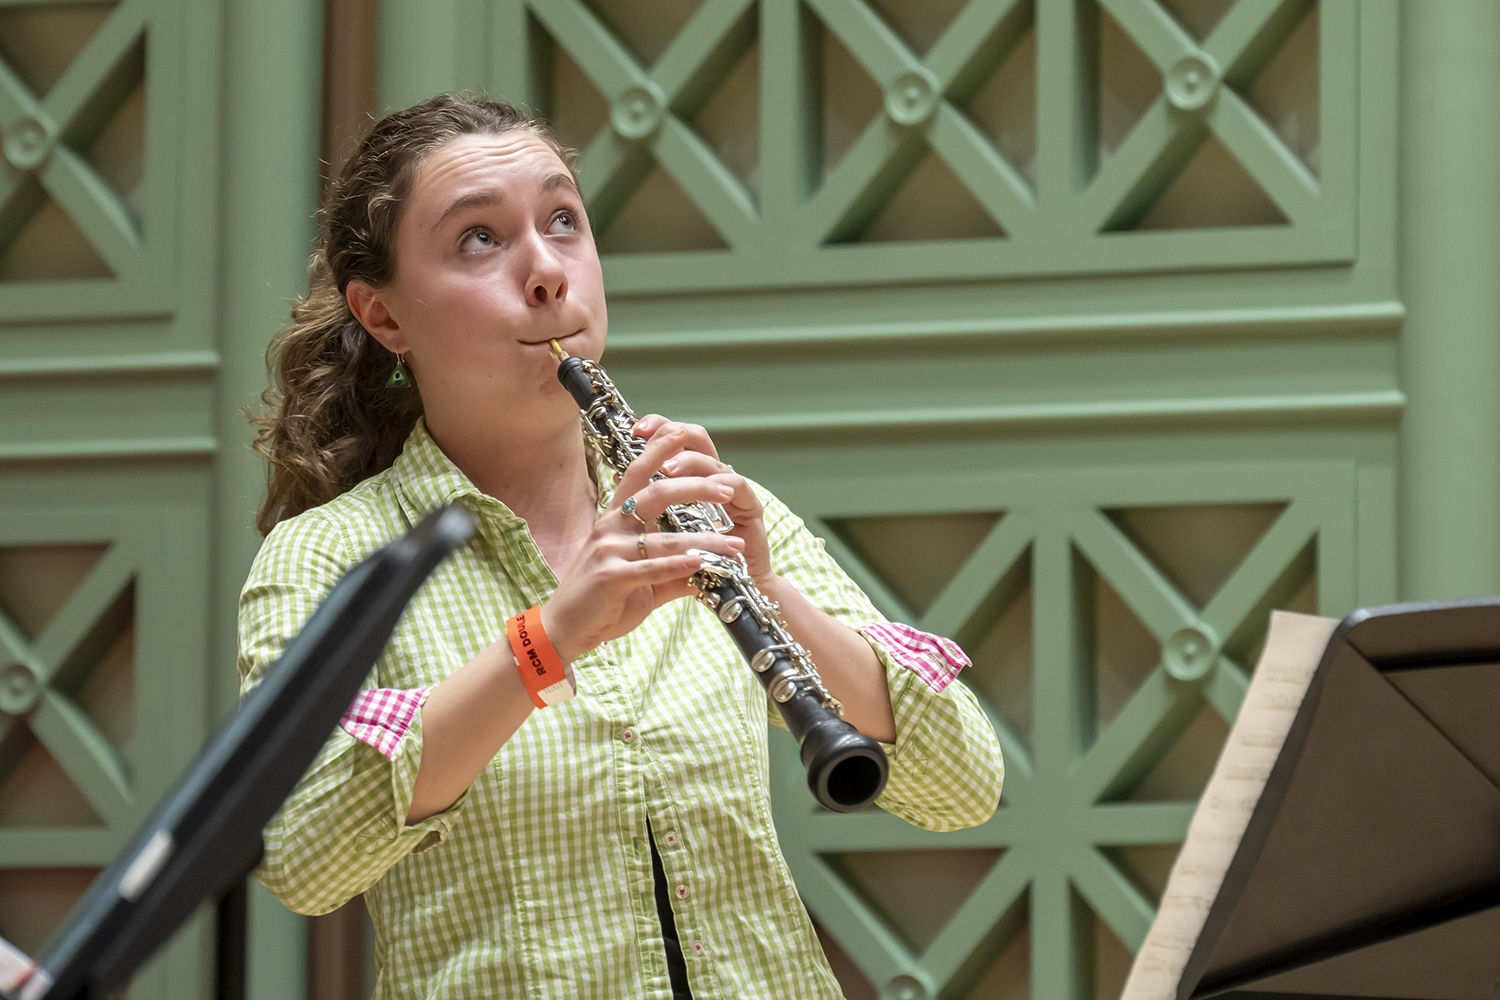 An oboist performing in the Performance Hall